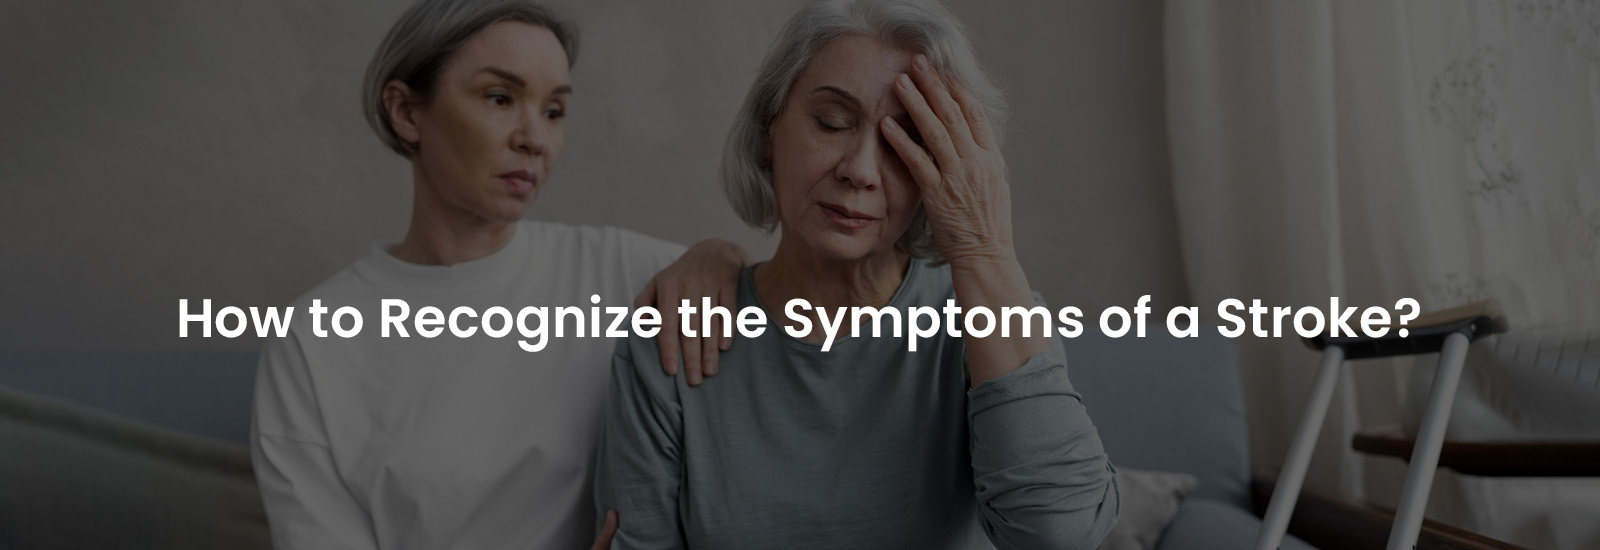 How to Recognize the Symptoms of a Stroke? | Banner Image